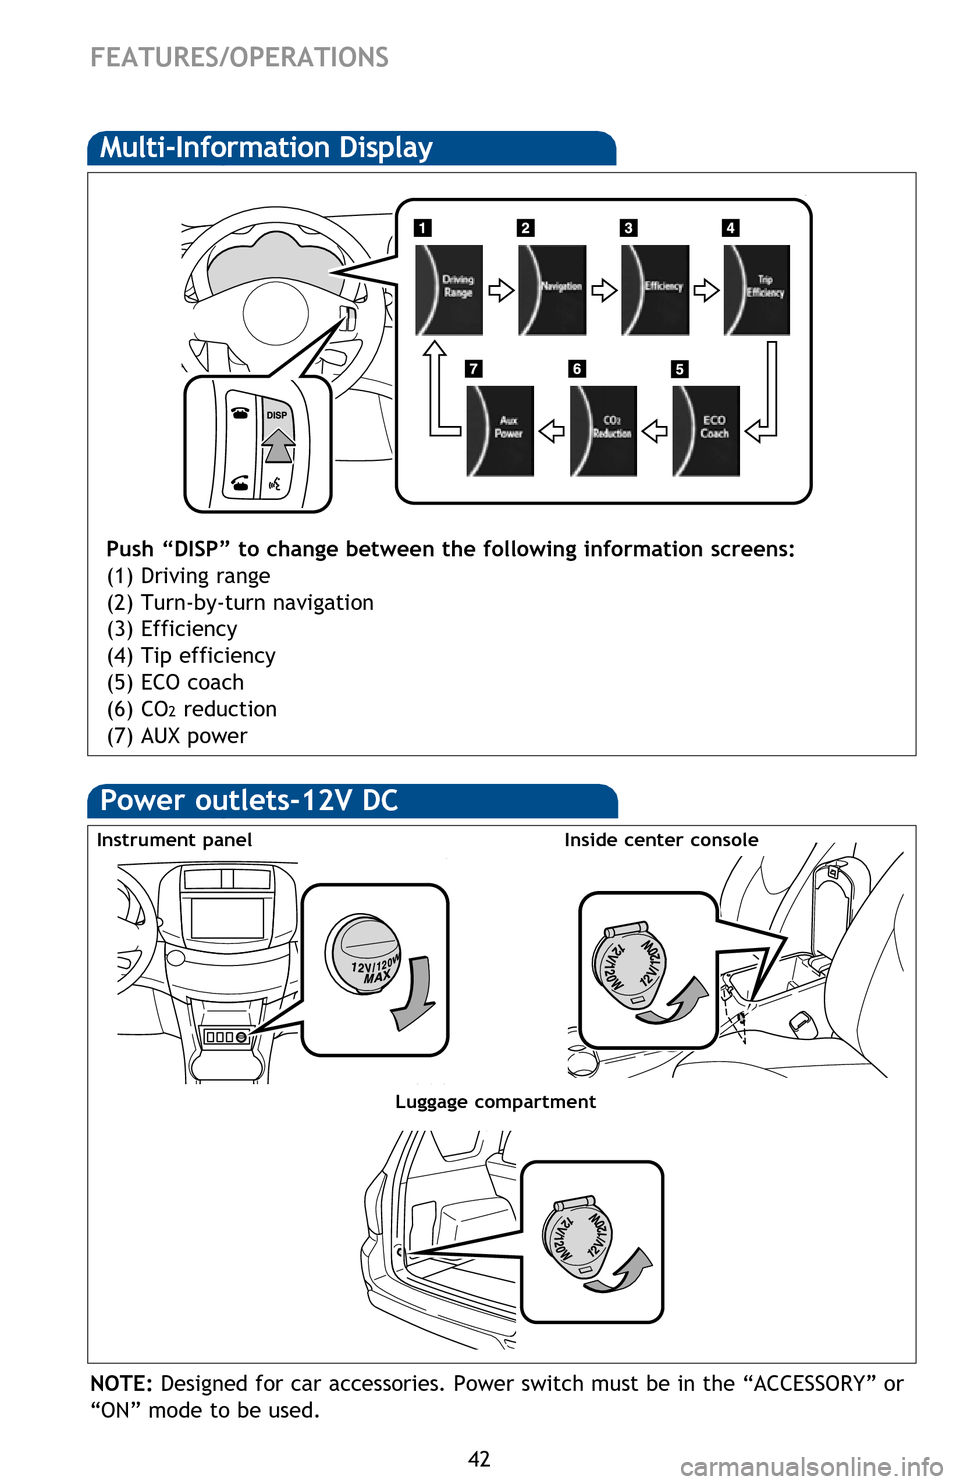 TOYOTA RAV4 EV 2012 1.G Quick Reference Guide 42
Power outlets-12V DC
NOTE: Designed for car accessories. Power switch must be in the “ACCESSORY” or 
“ON” mode to be used.
FEATURES/OPERATIONS
Luggage compartment
HAC helps prevent rolling 